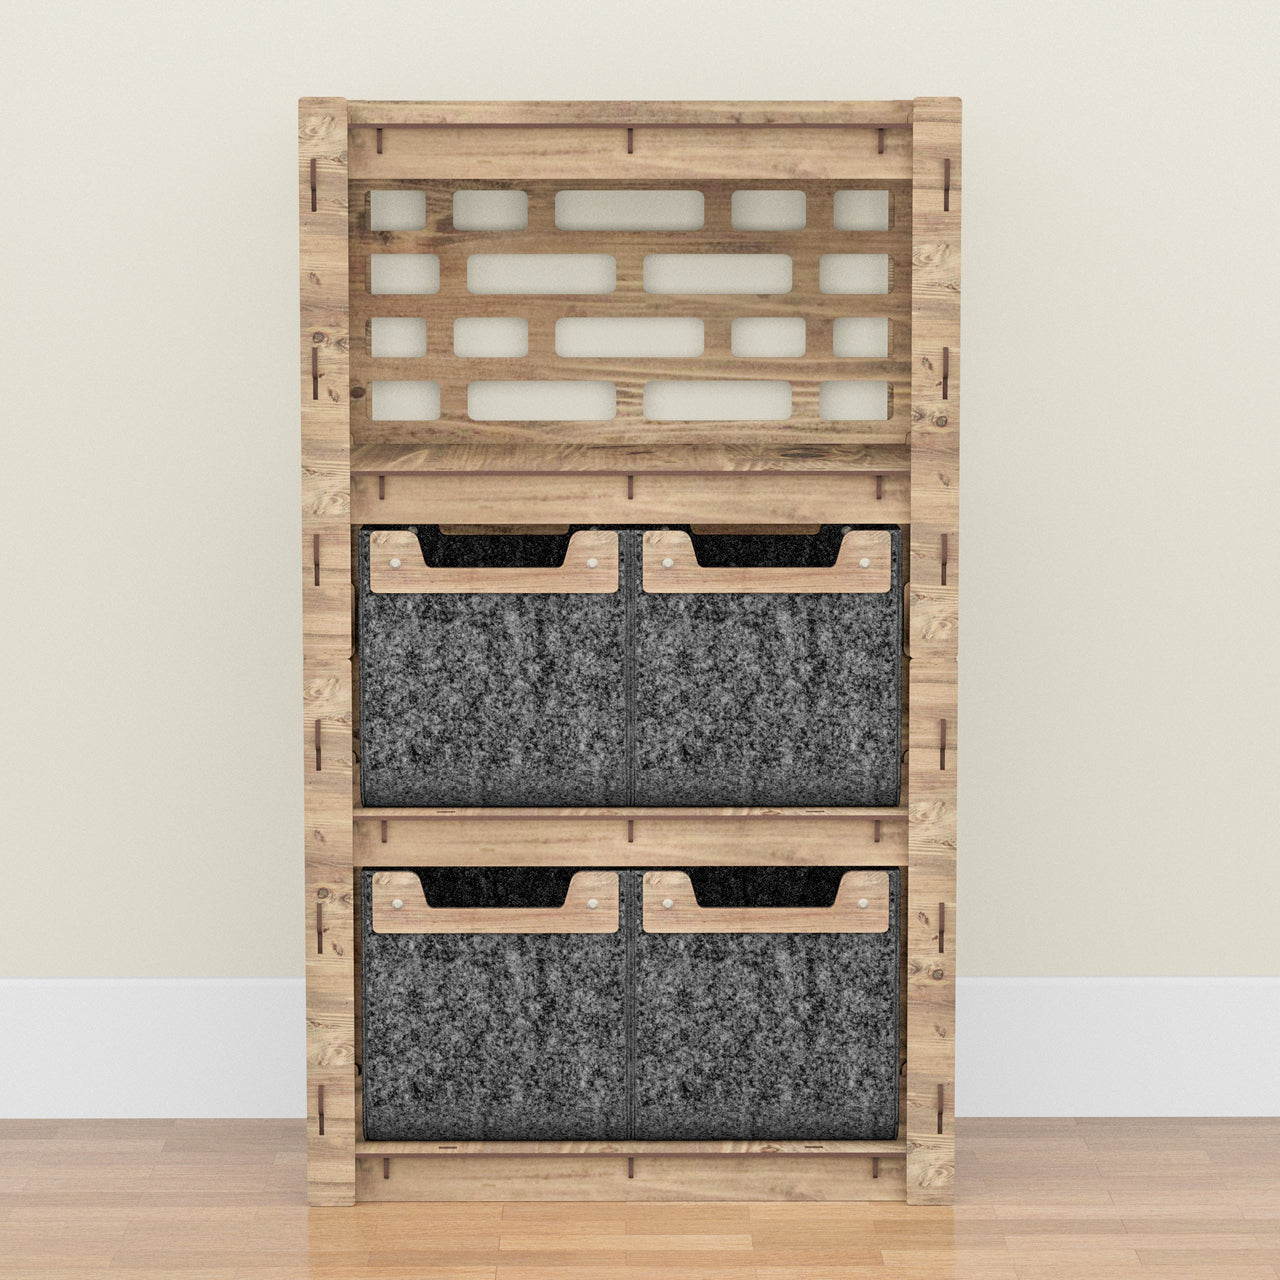 Brickwall Chest Of 4 Drawers Storage Cabinet [4 SMALL BLACK BINS]